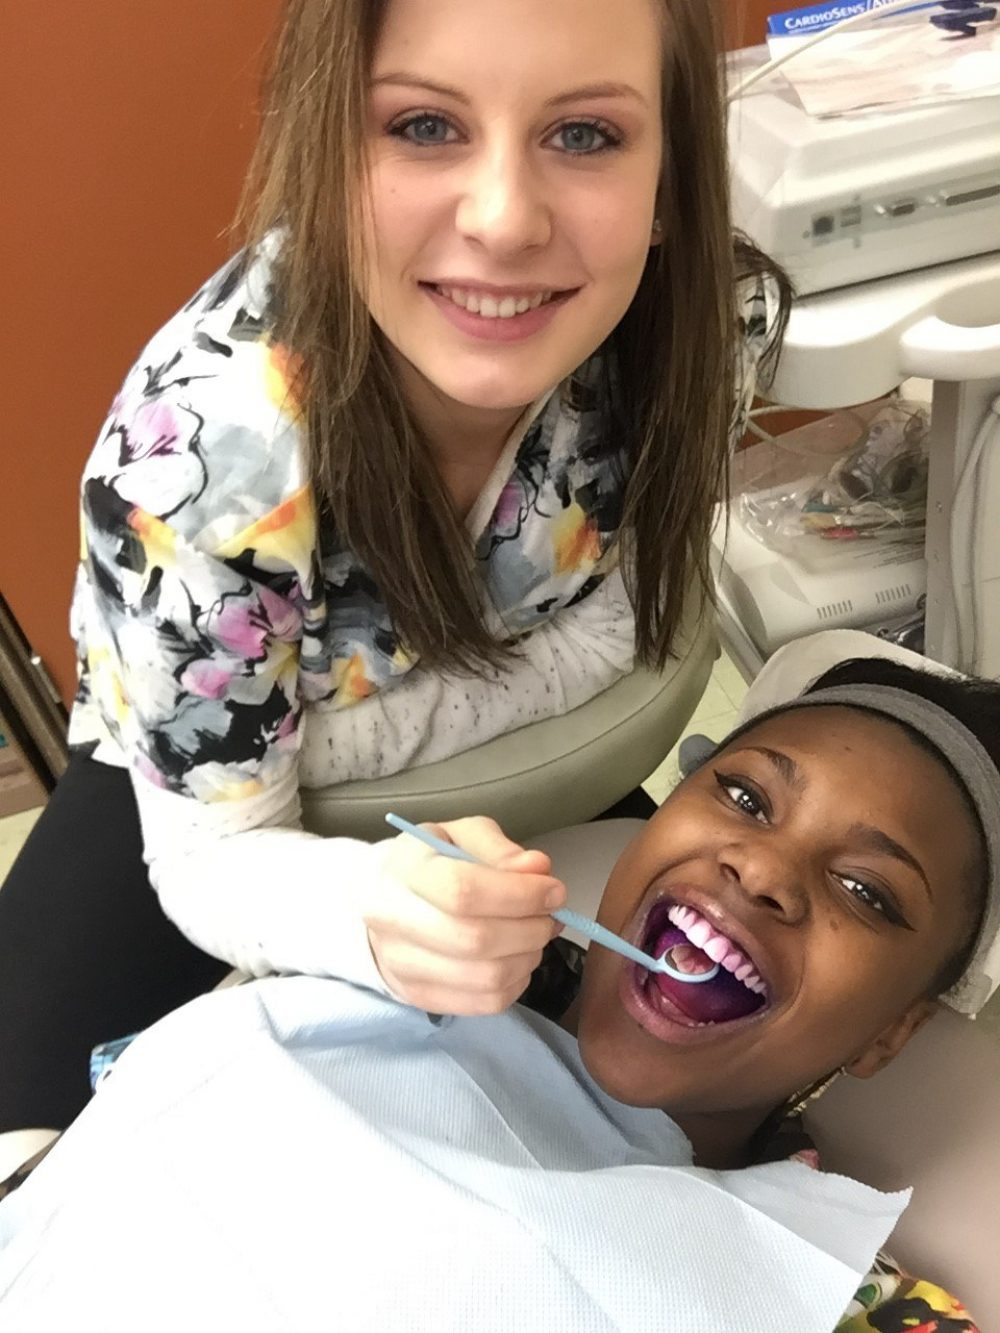 Student practicing dental techniques on another student